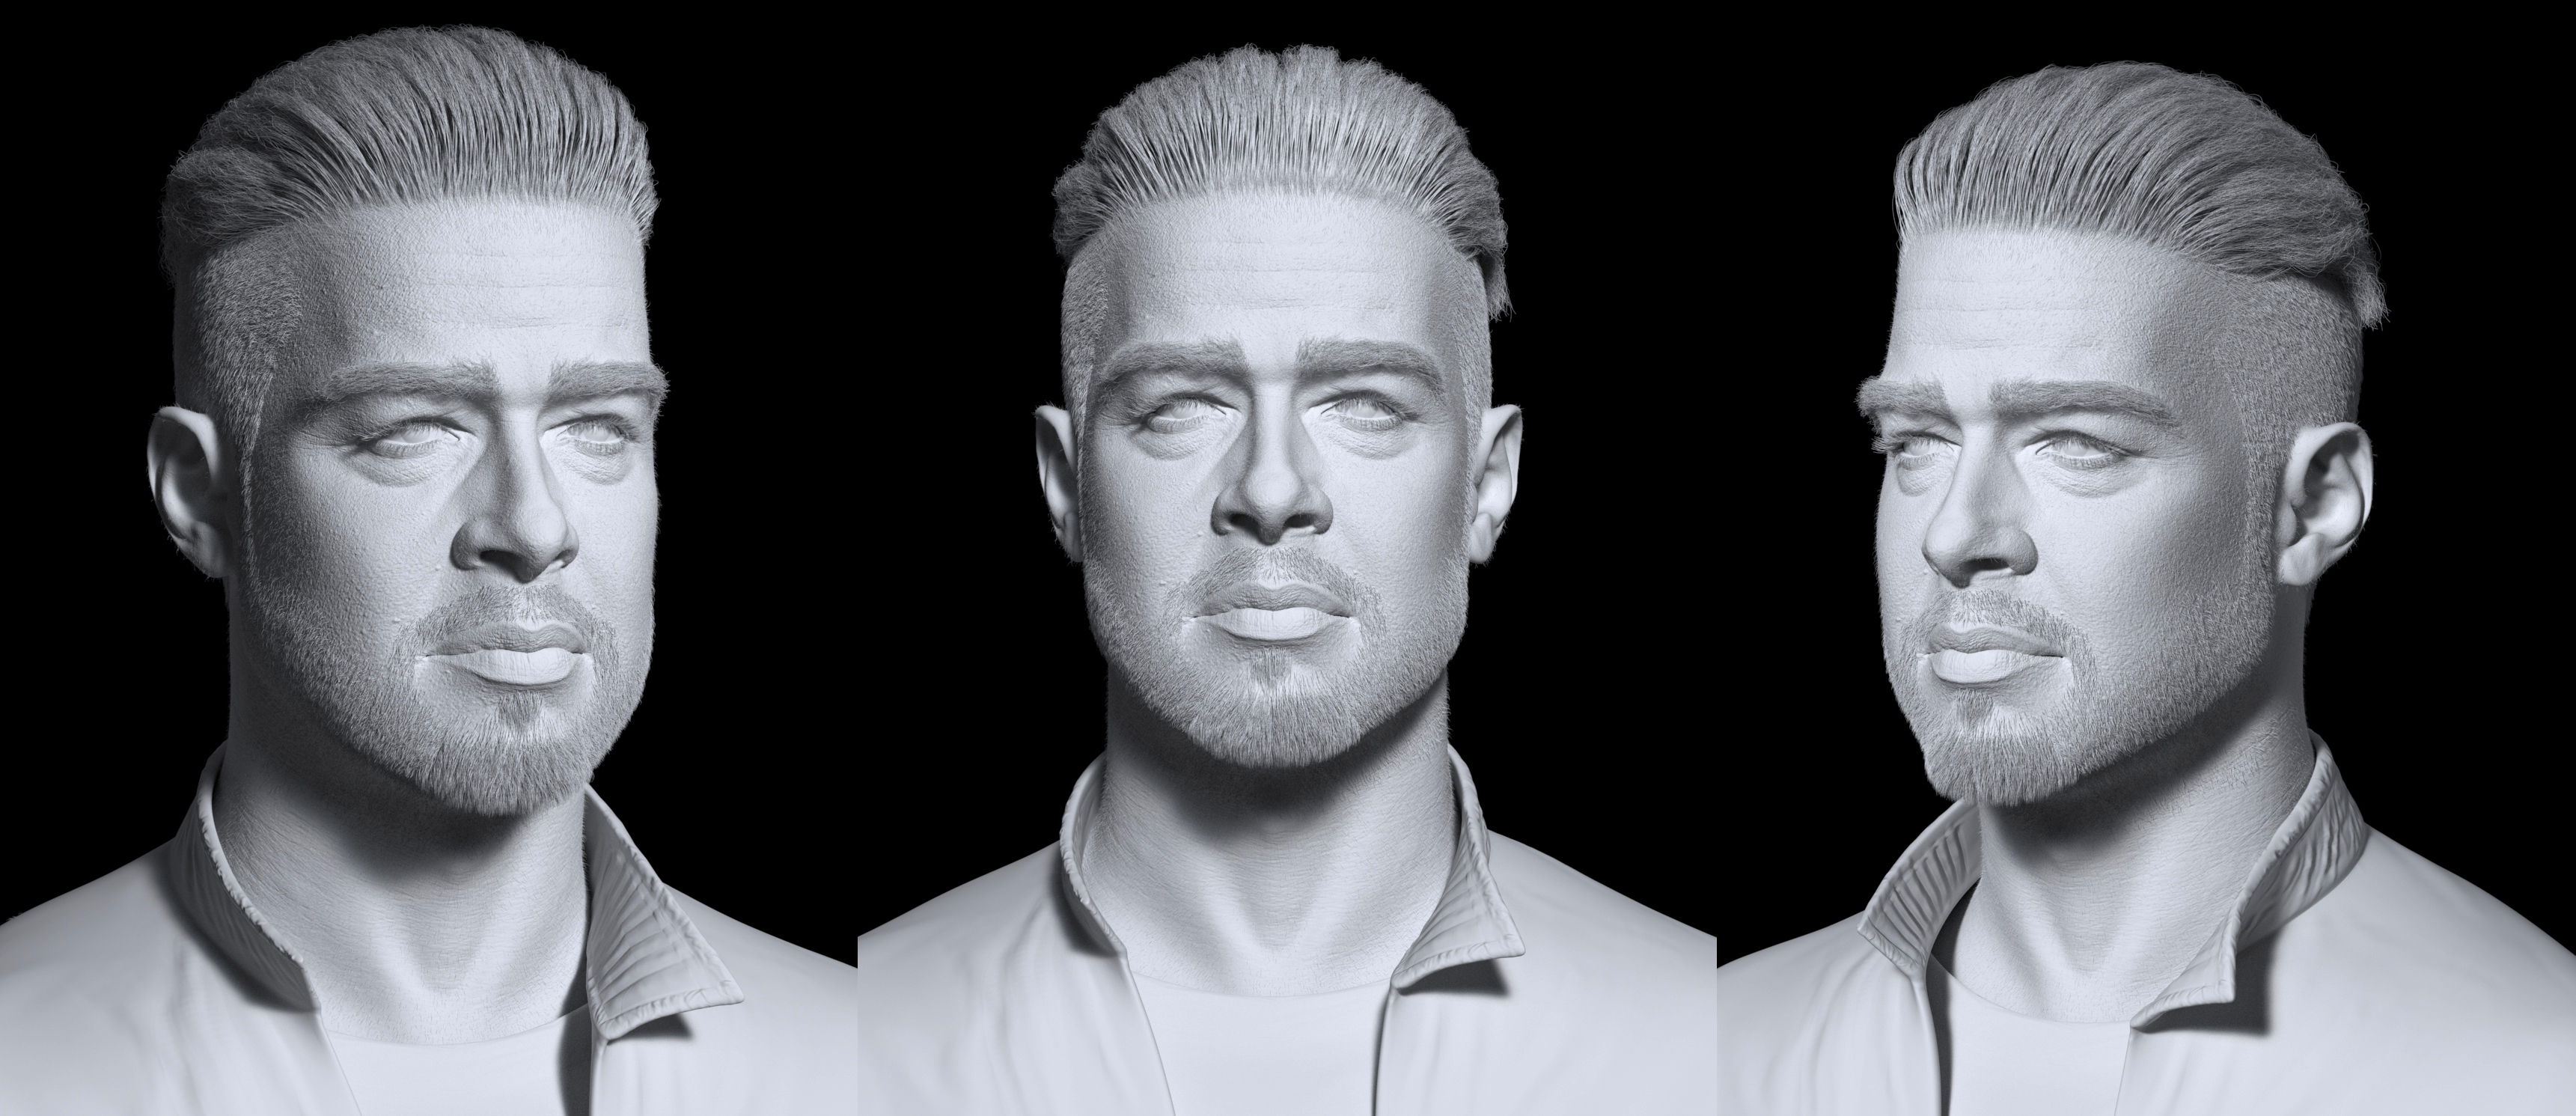 do you need laser face scans to do photorelism zbrush